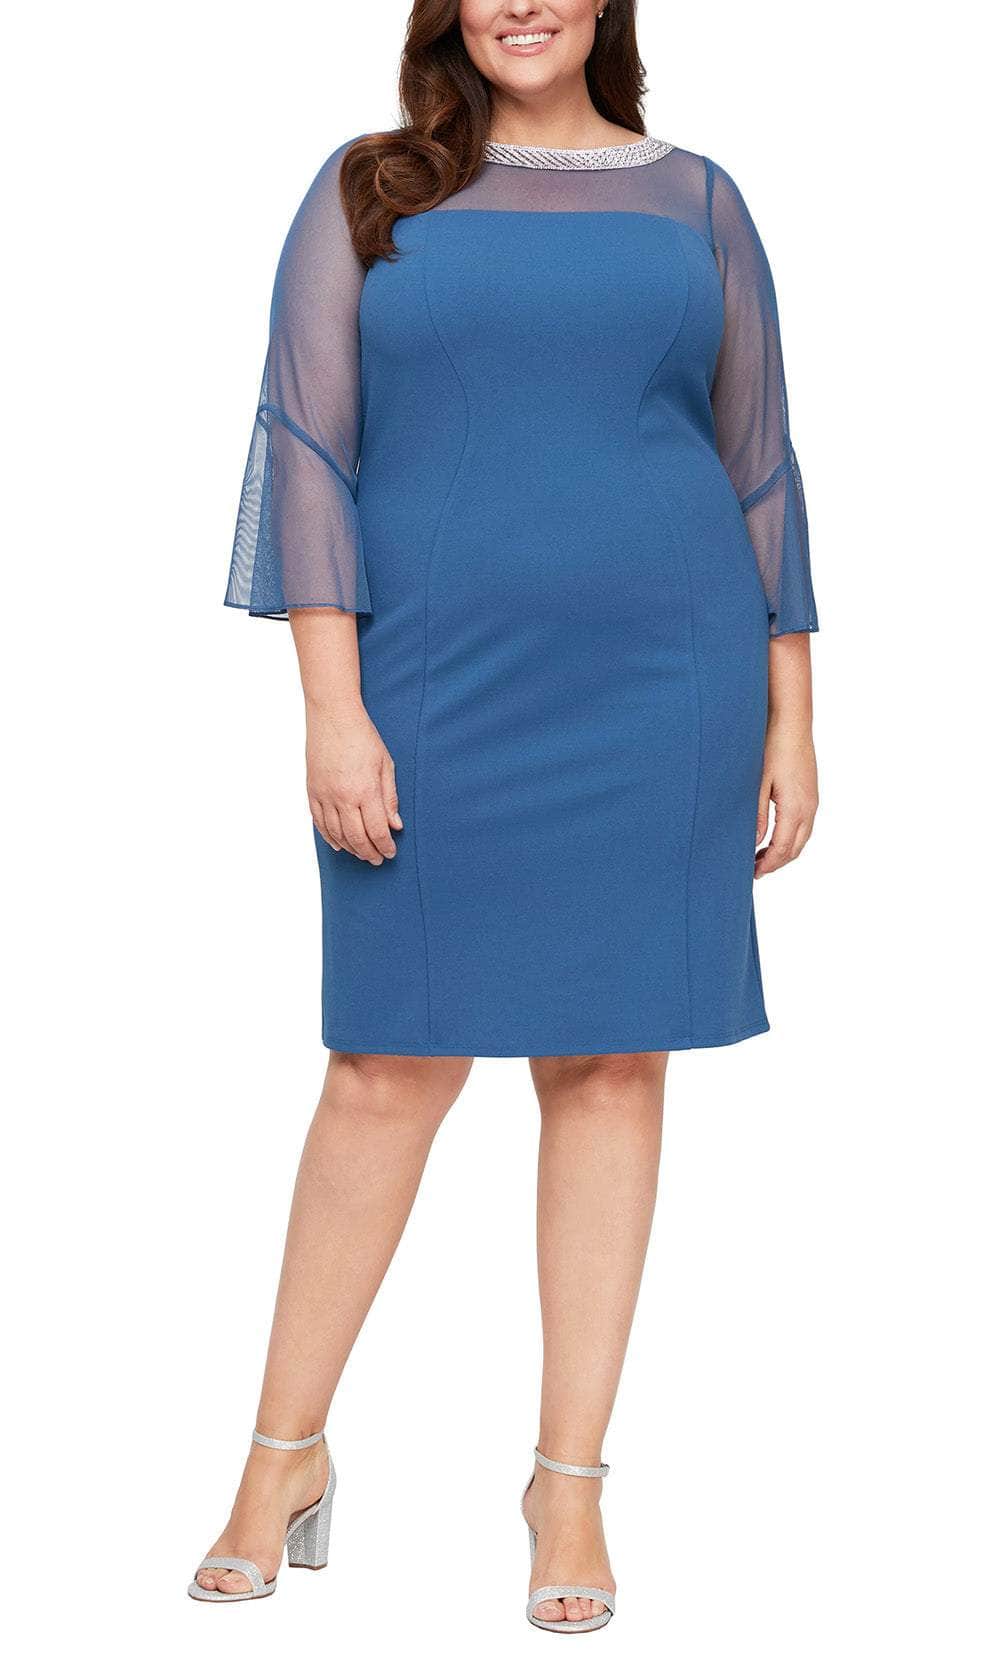 Alex Evenings 460146 - Beaded Illusion Neckline Cocktail Dress Special Occasion Dress 14W / Wedgewood